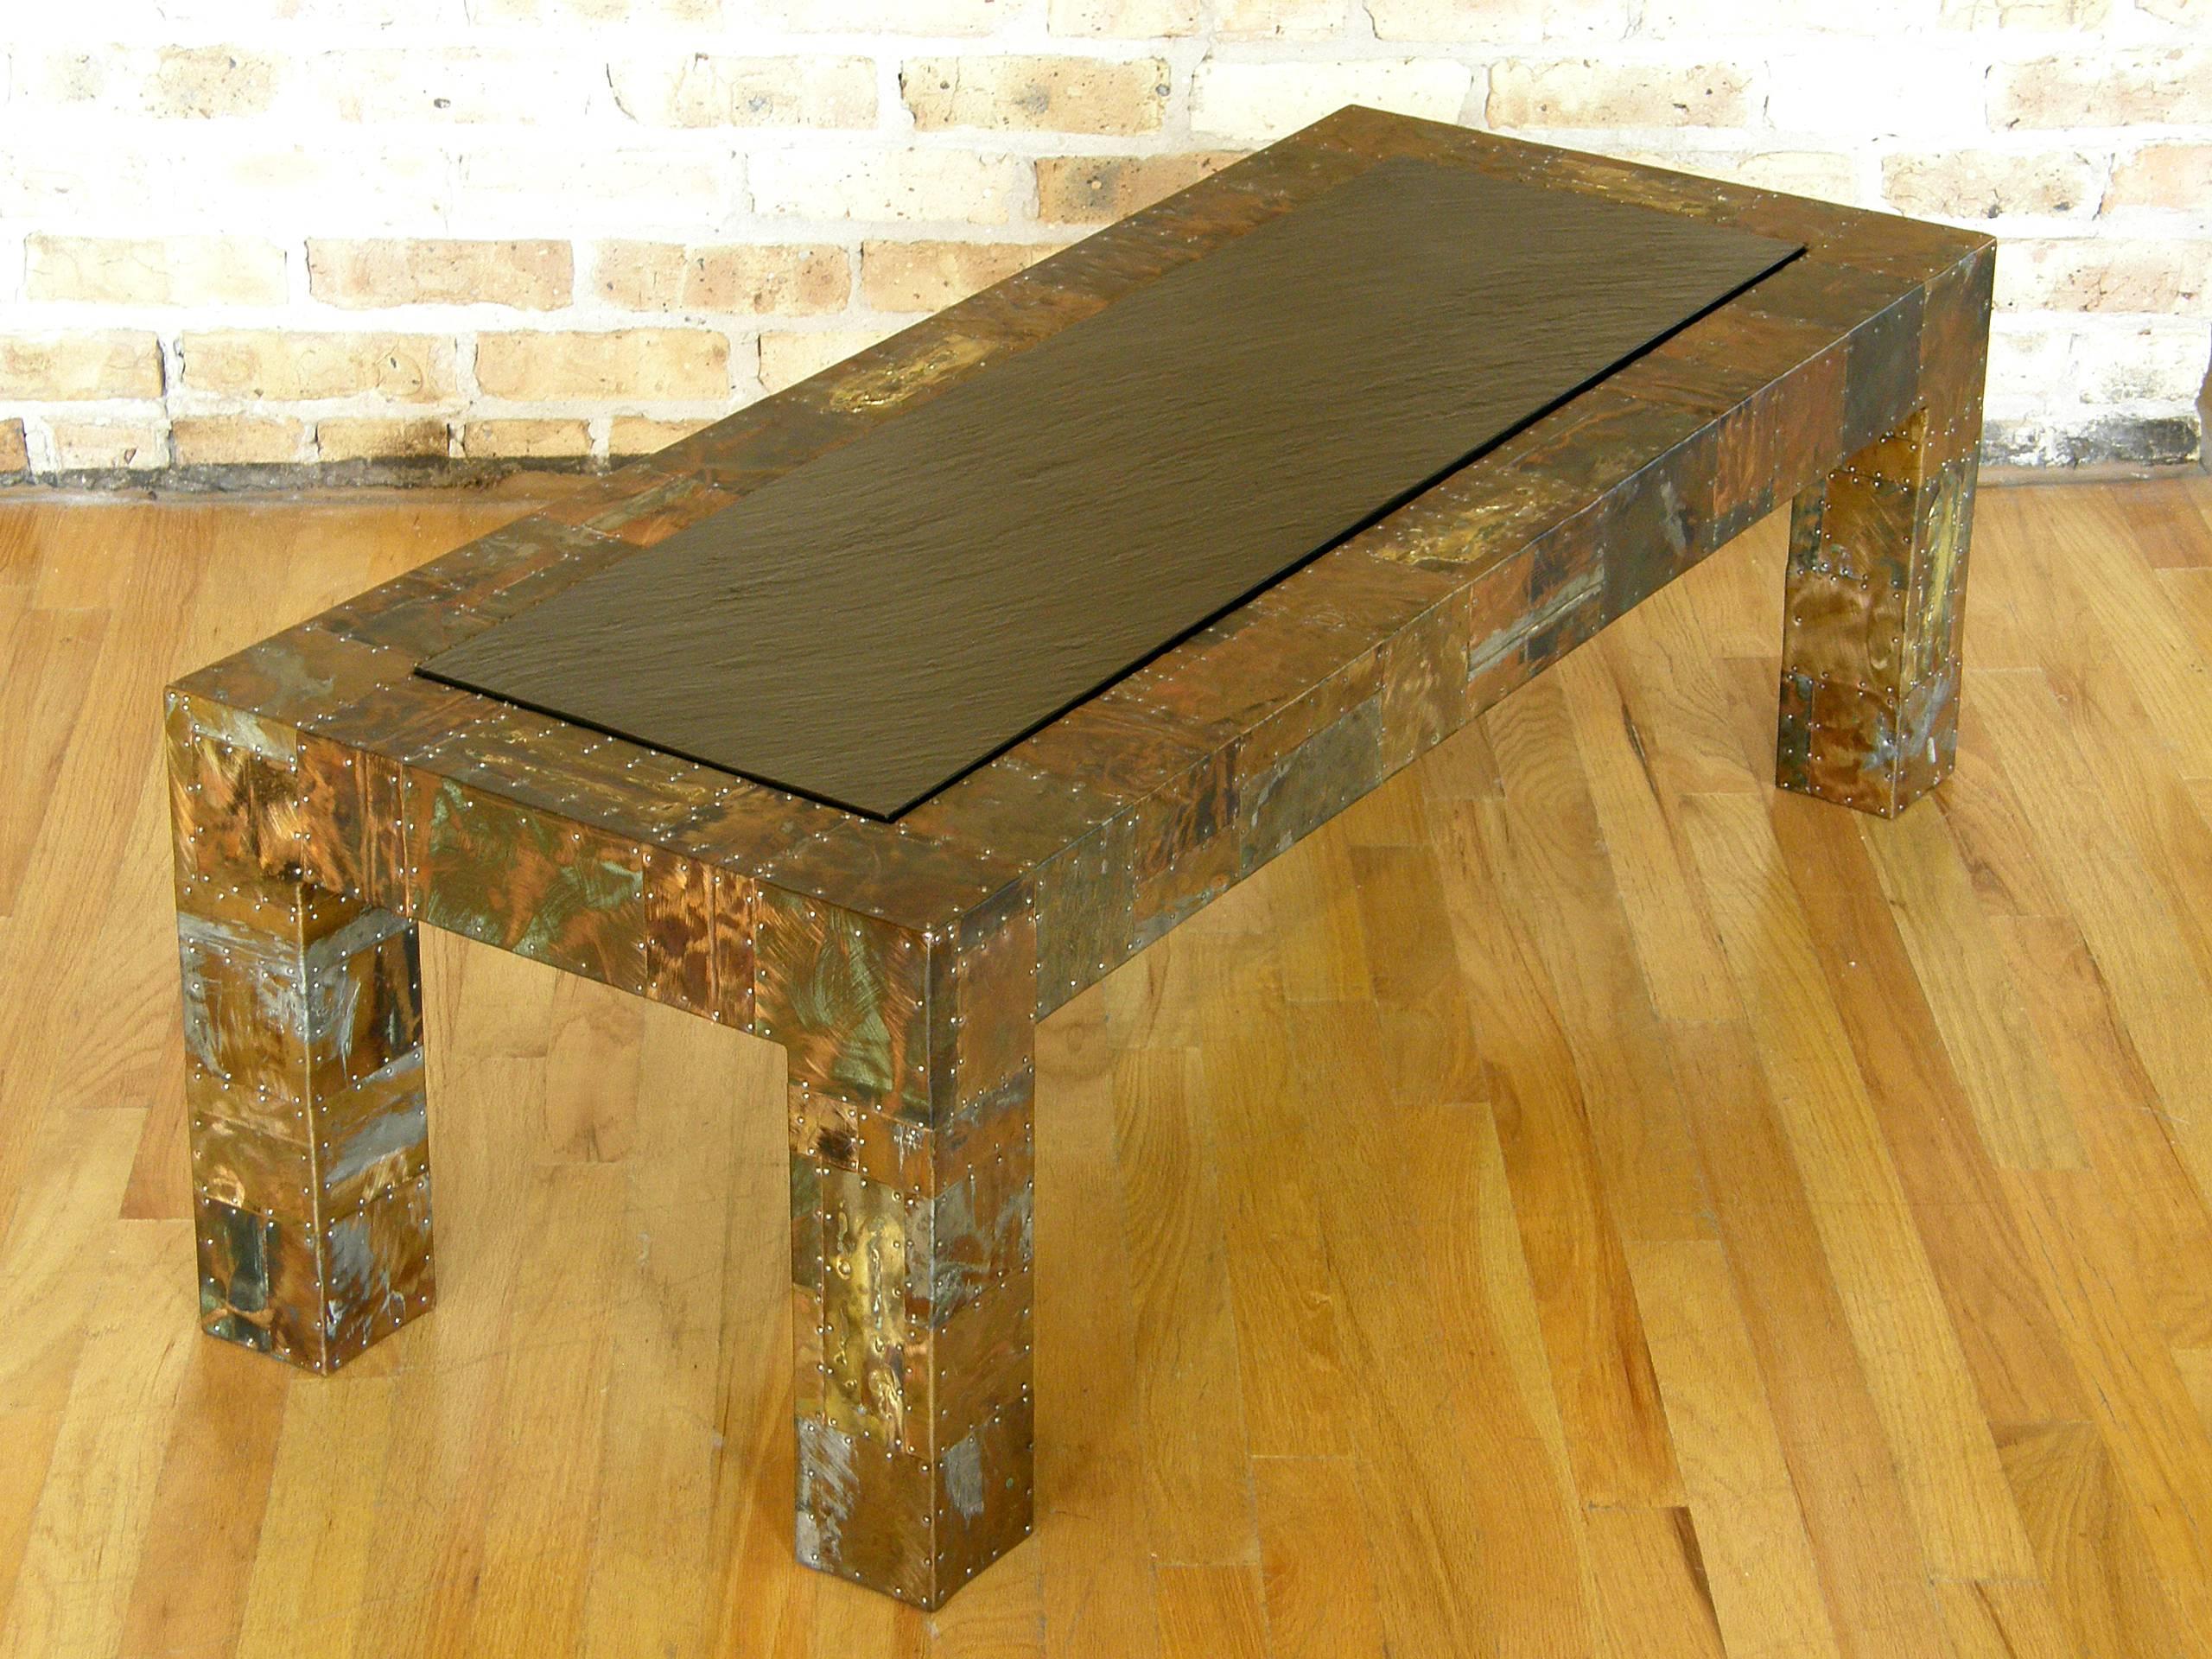 Studio made coffee table with patchwork copper and brass clad surface. The metal pieces are patinated and enameled with applied, torch cut, and ground down textures in the finish. The nailheads that attach the various pieces are a tactile and